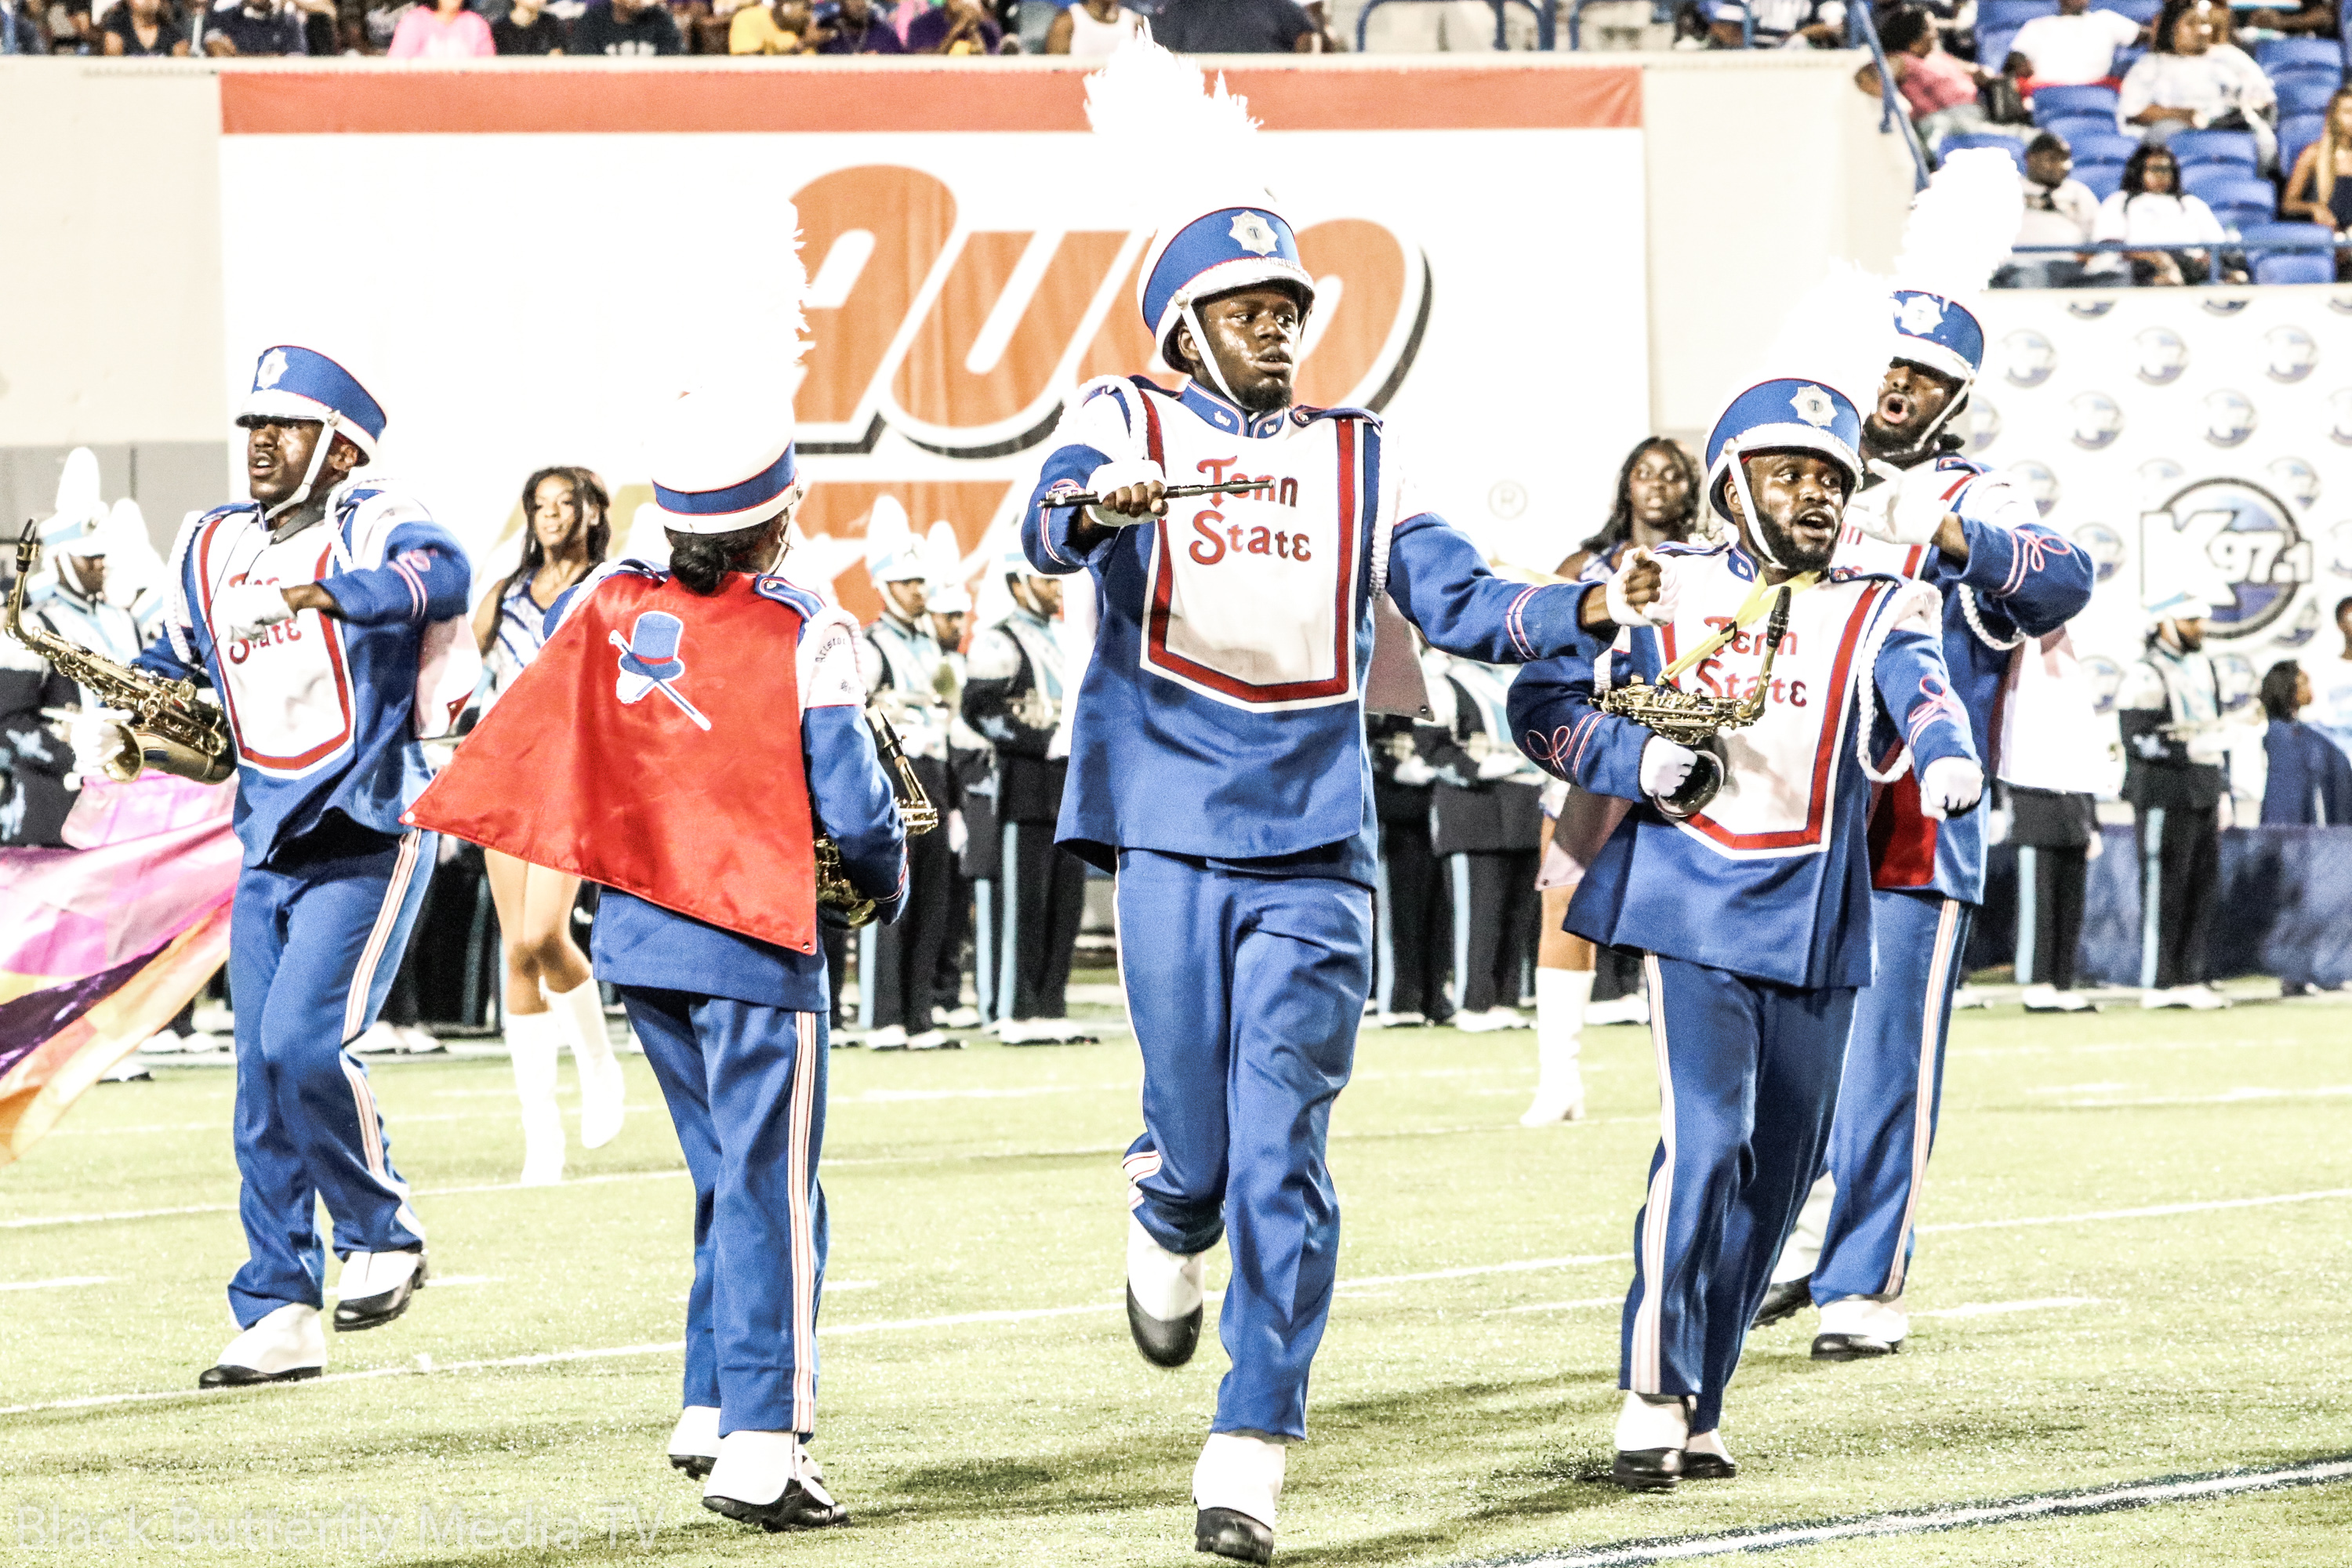 TSU Aristocrat of Bands performing at the 30th Southern Heritage Classic.